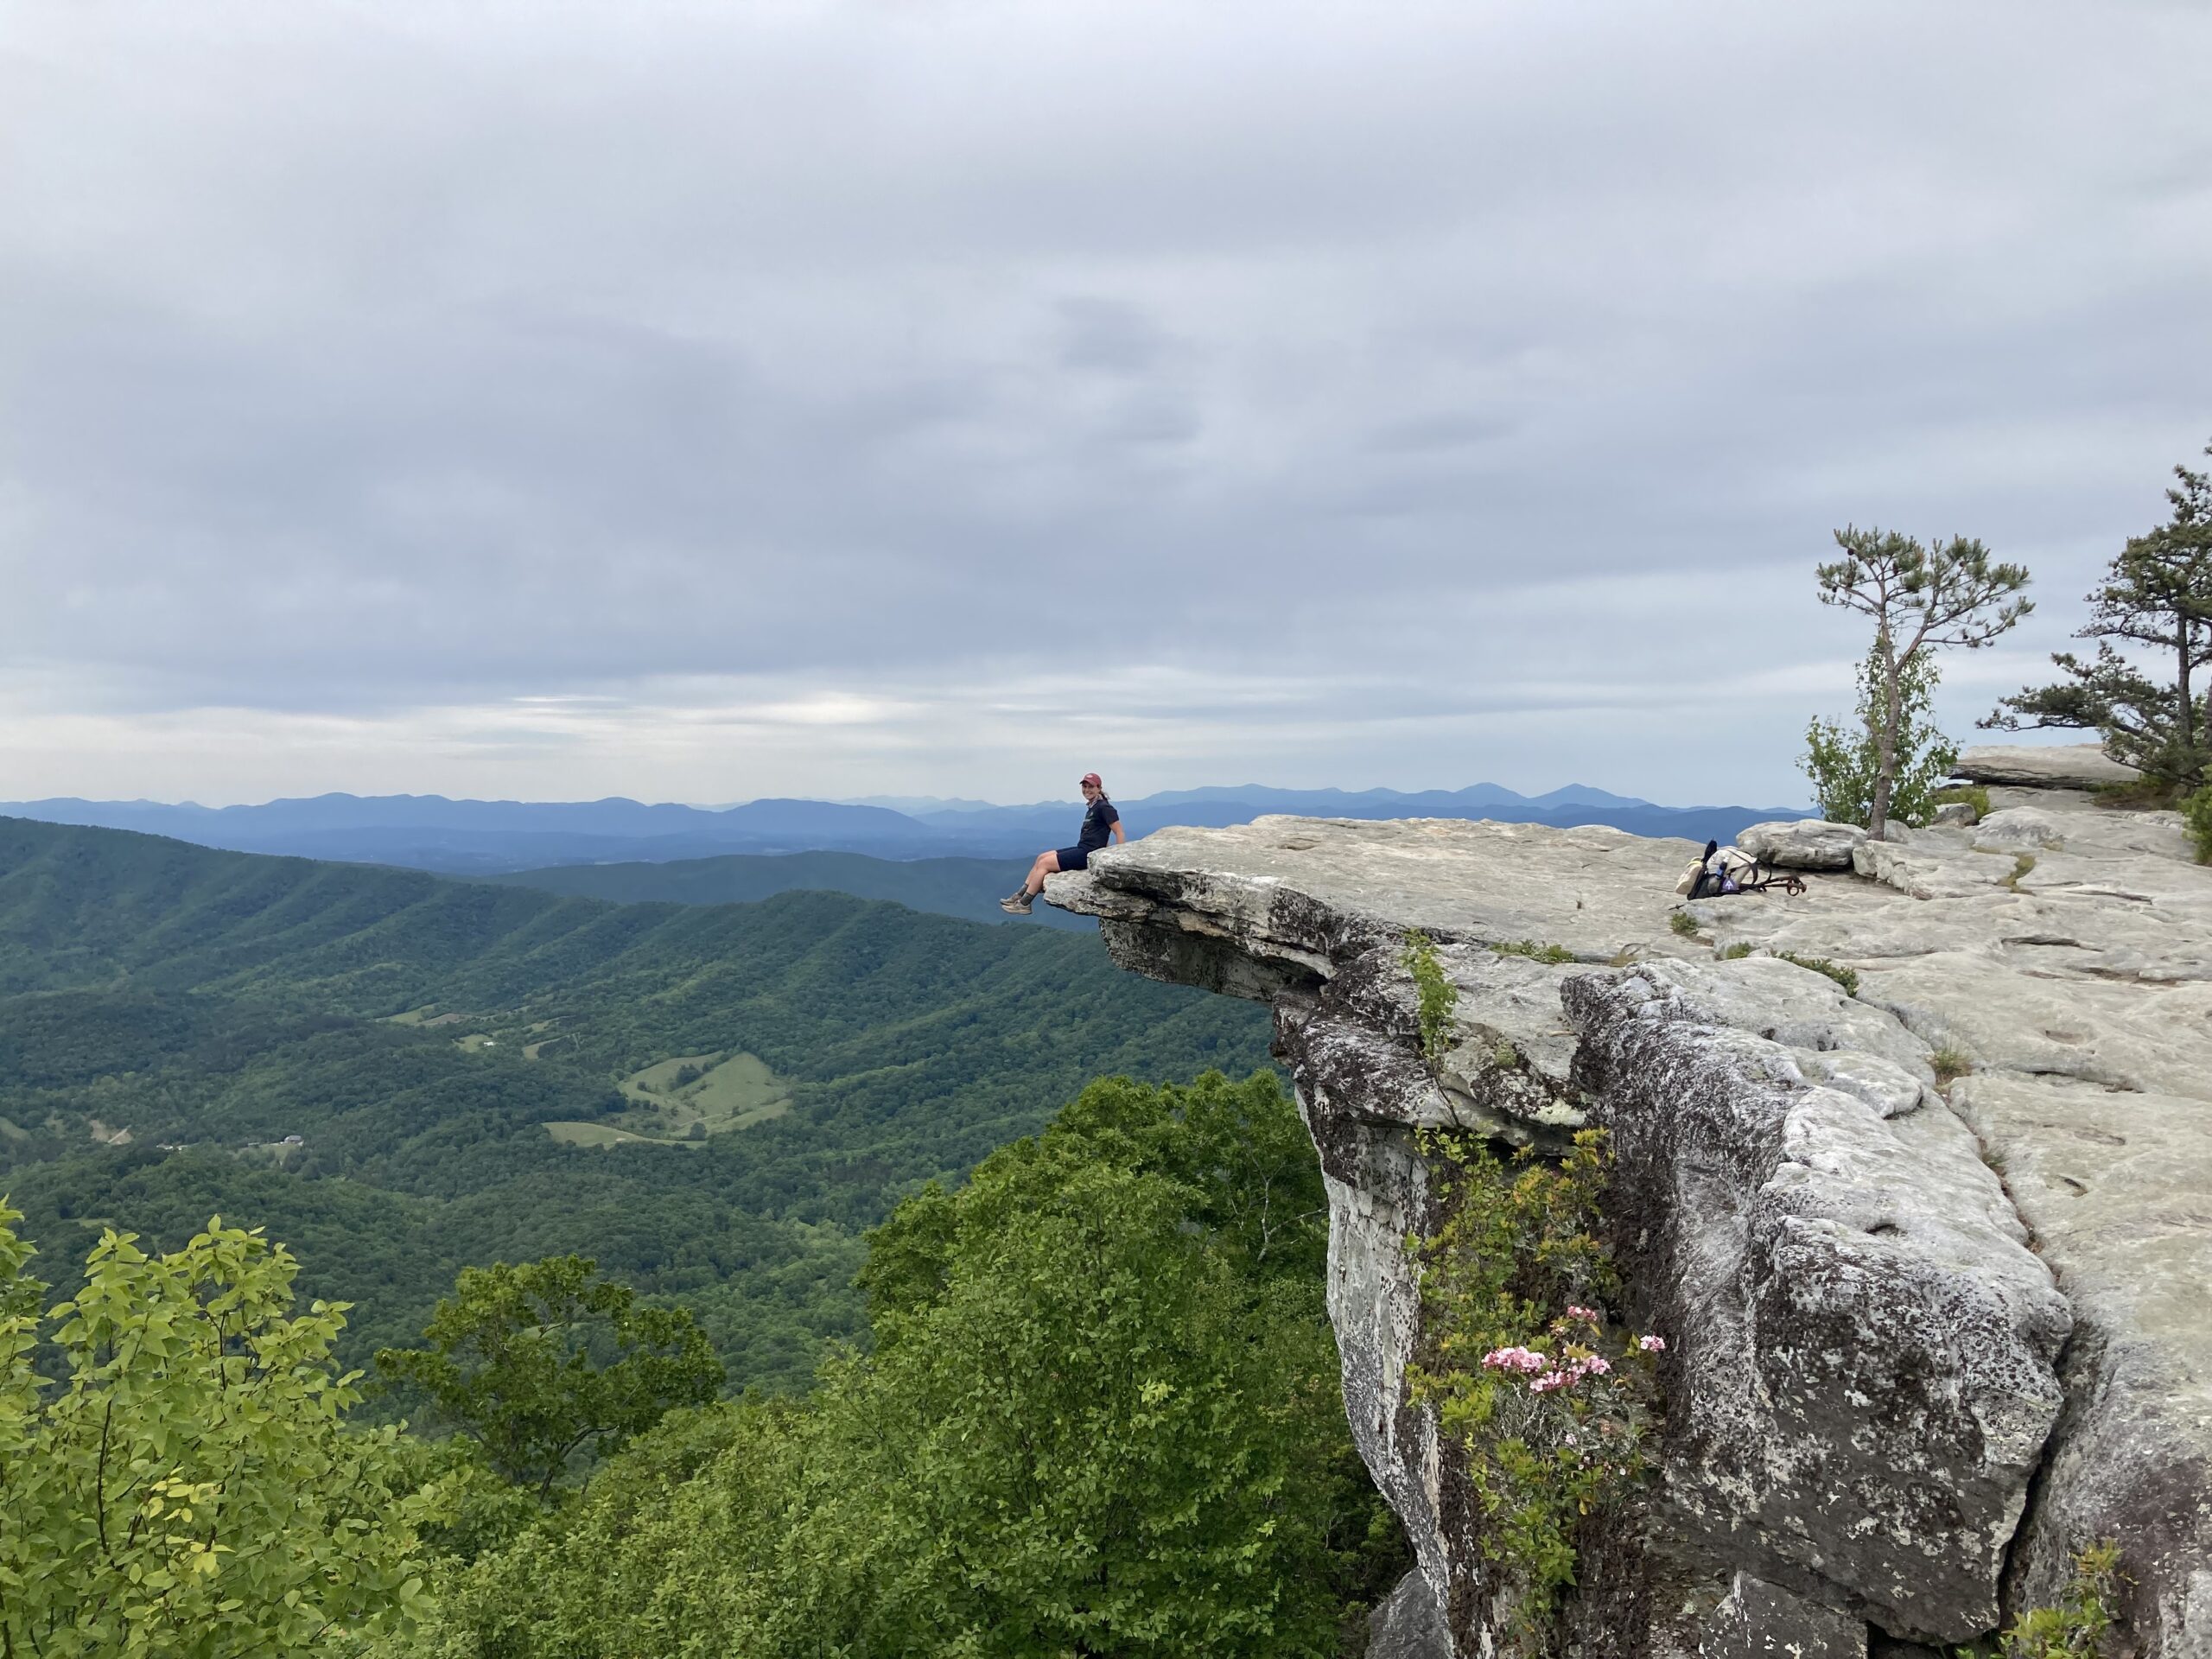 McAffee Knob is one of the most photographed parts of the Appalachian Trail.